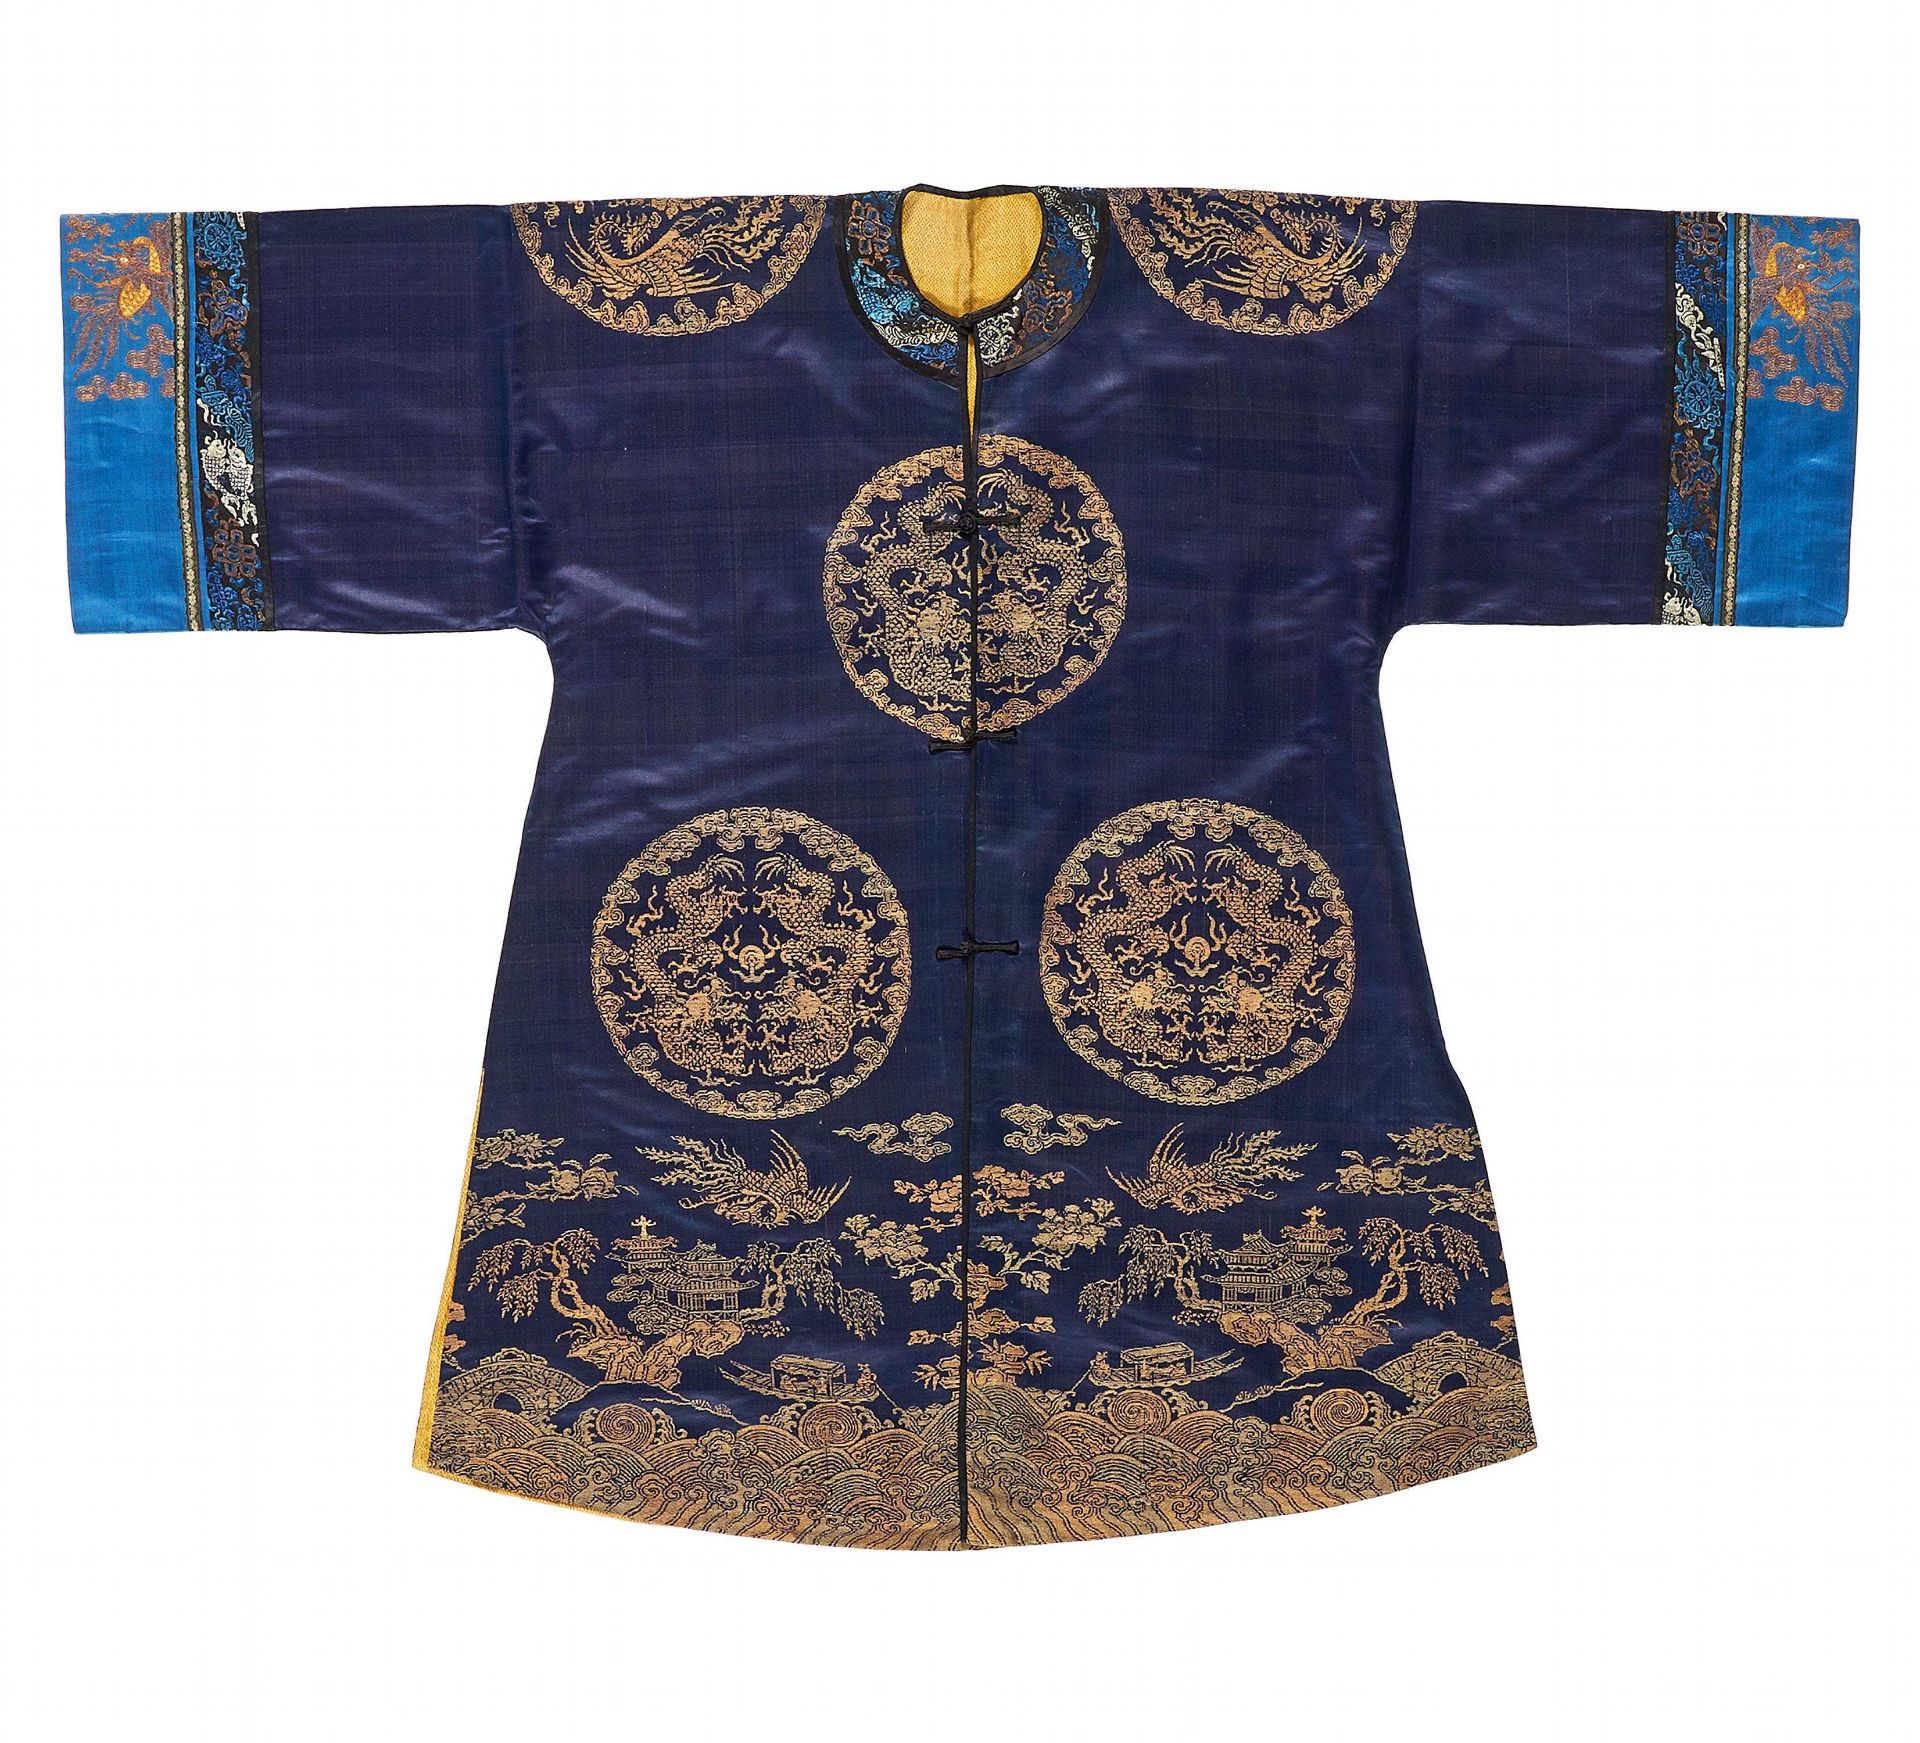 LADIES OFFICIAL GARMENT. China. About 1900. Navy blue sateen silk with supplement pattern weft in